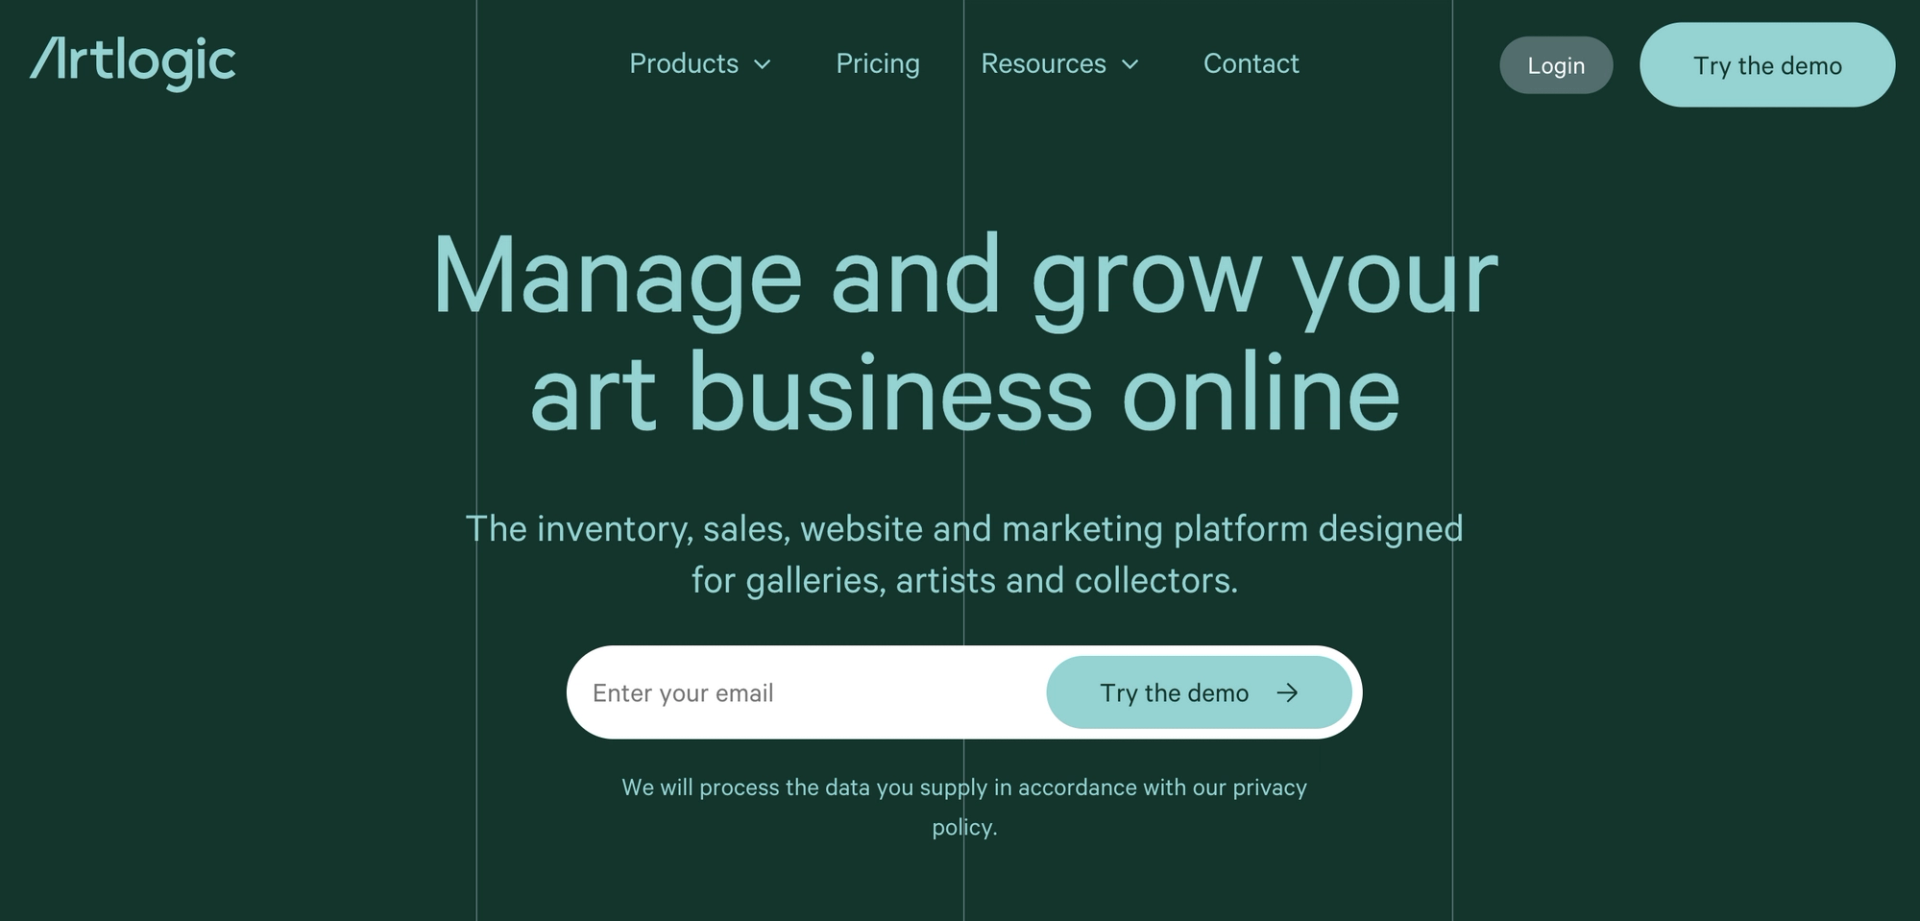 A screenshot of the landing page for the platform Artlogic, with the slogan "Manage and grow your art business online" against a green background.